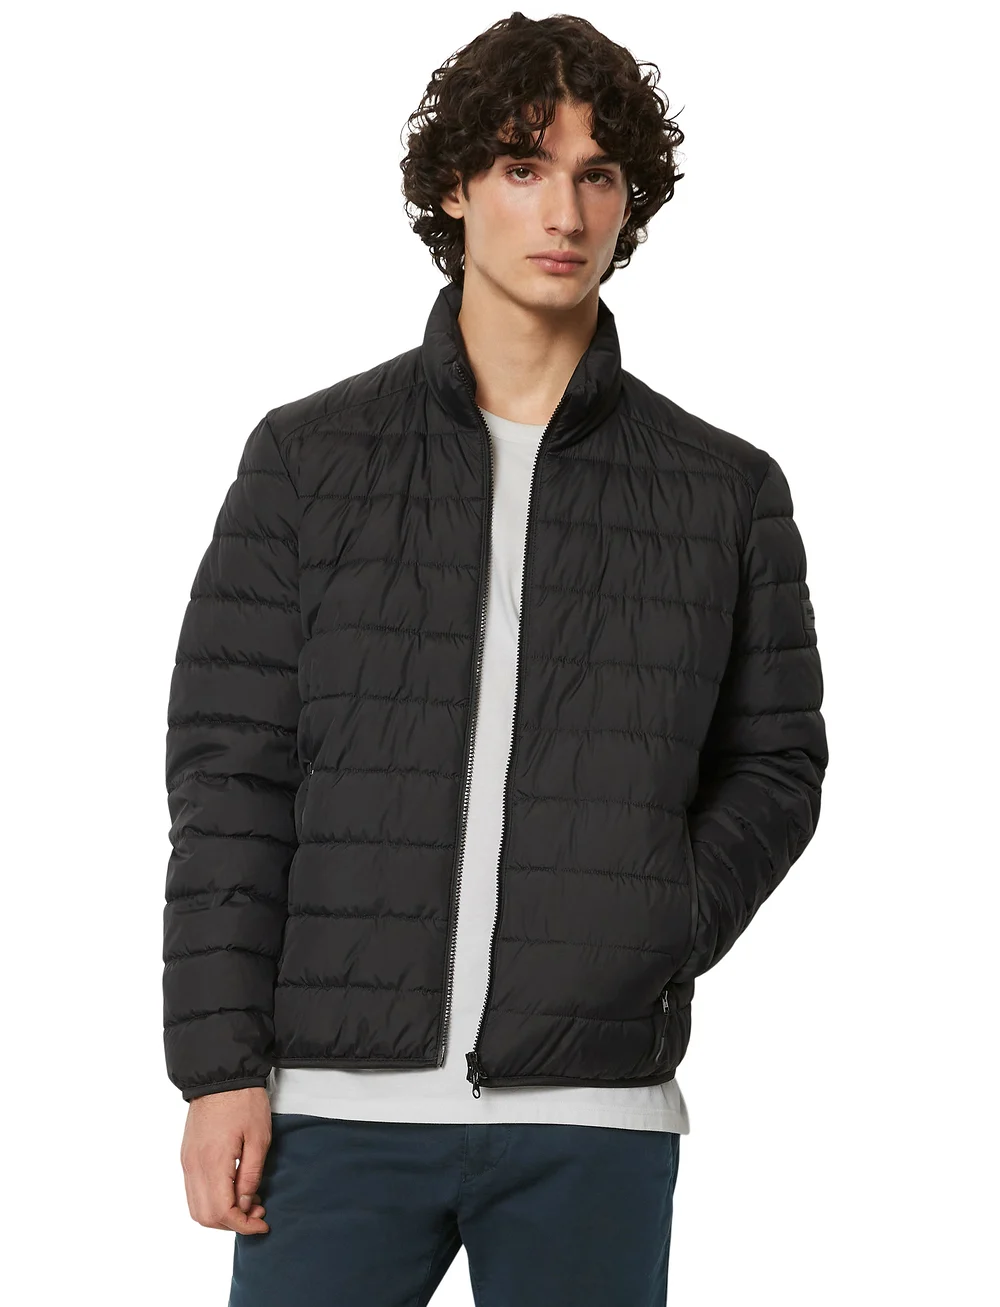 Marc O\'Polo Woven Outdoor Jackets - 204.95 €. Buy Padded jackets from Marc  O\'Polo online at Boozt.com. Fast delivery and easy returns